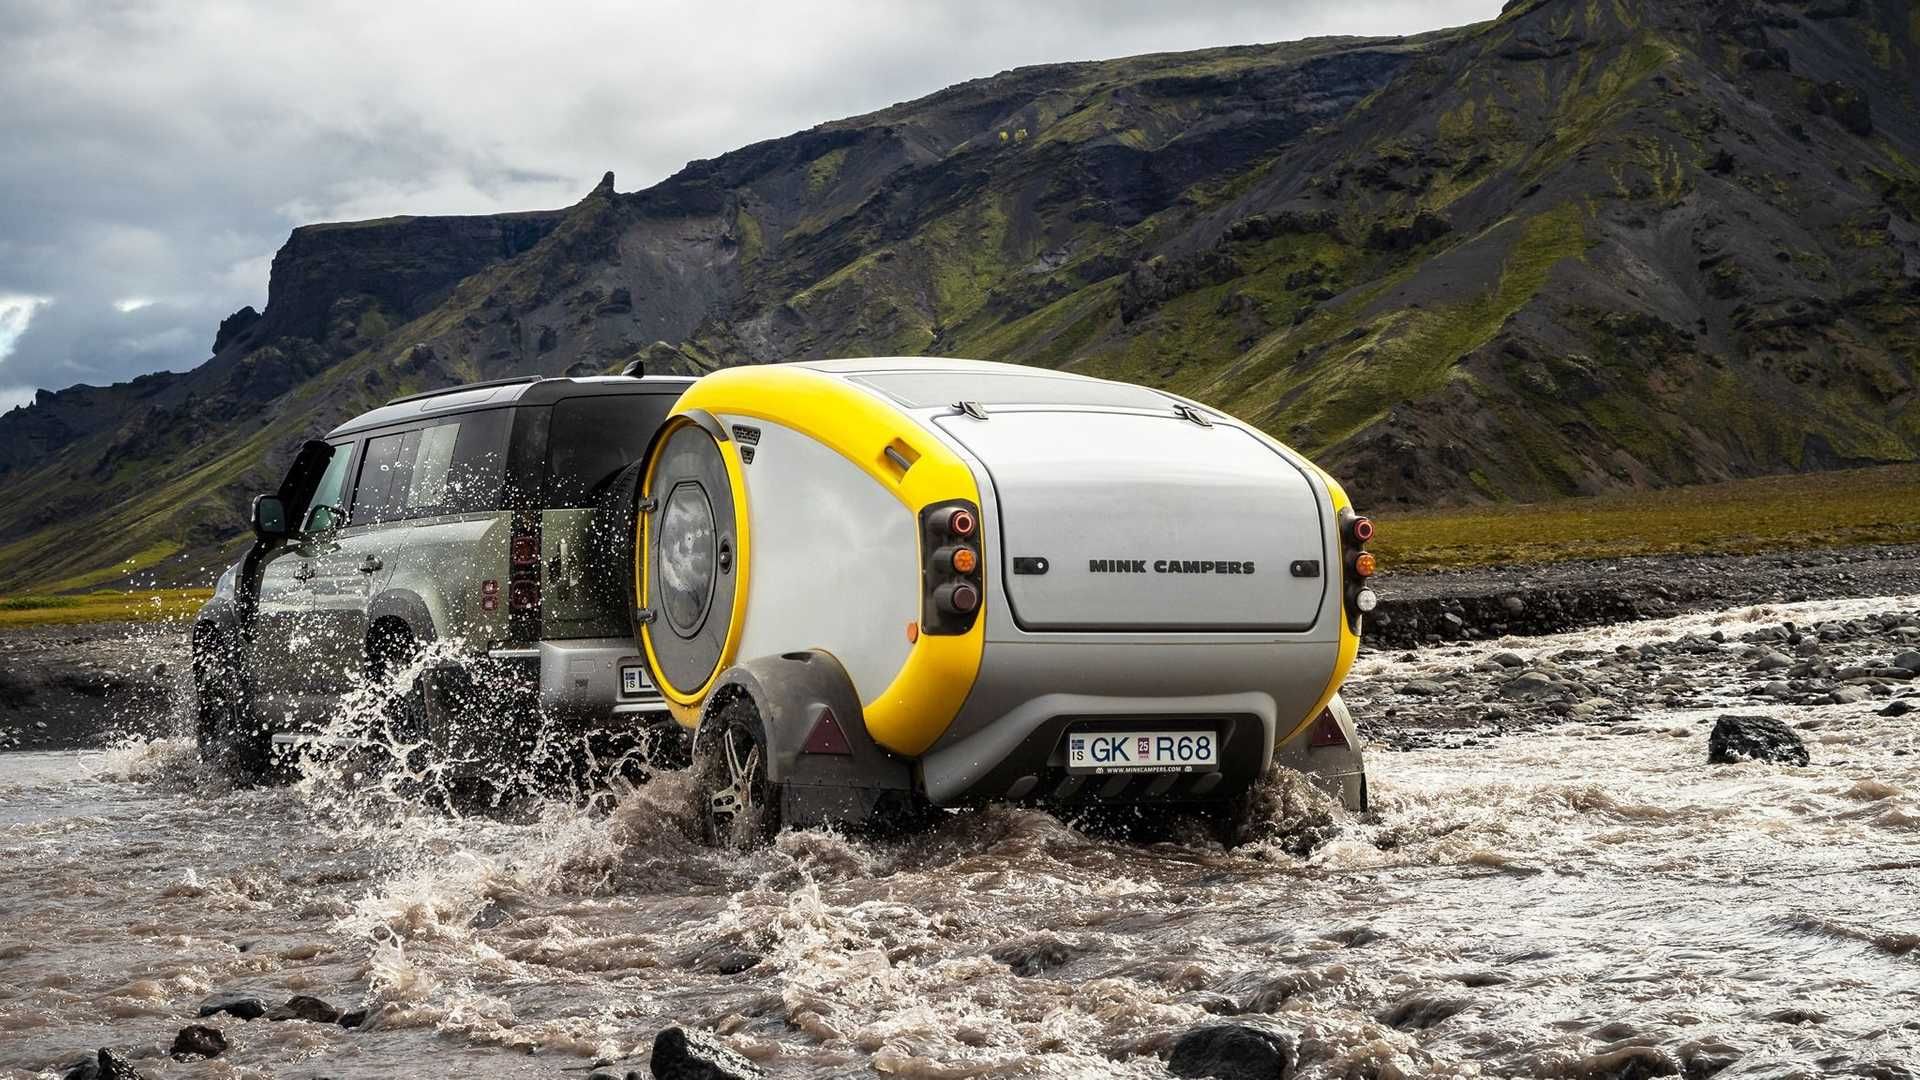 A MINK Camper Attached To An SUV